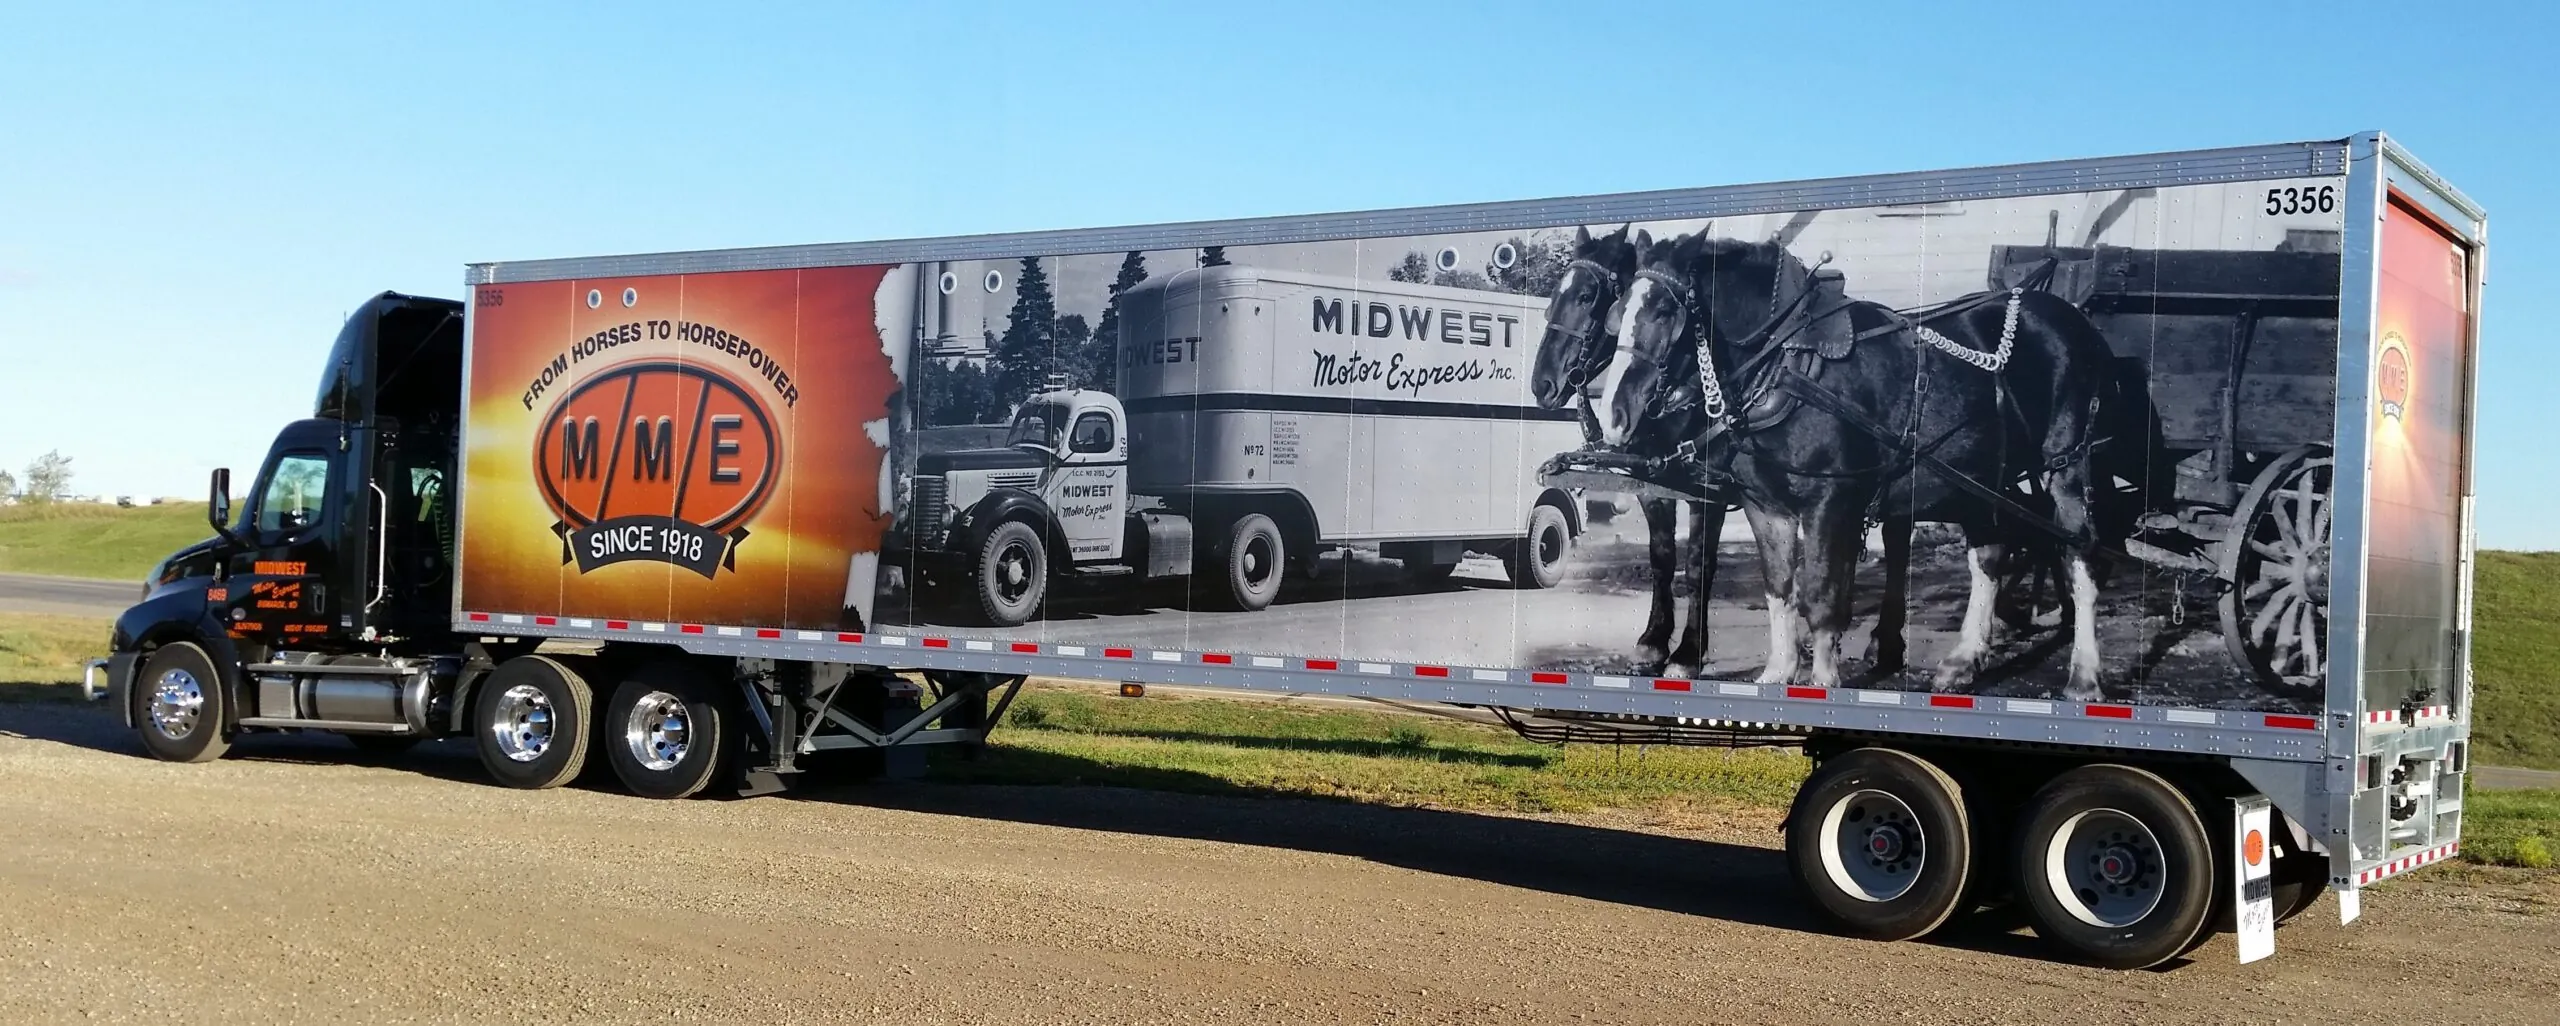 midwest motor express truck and trailer